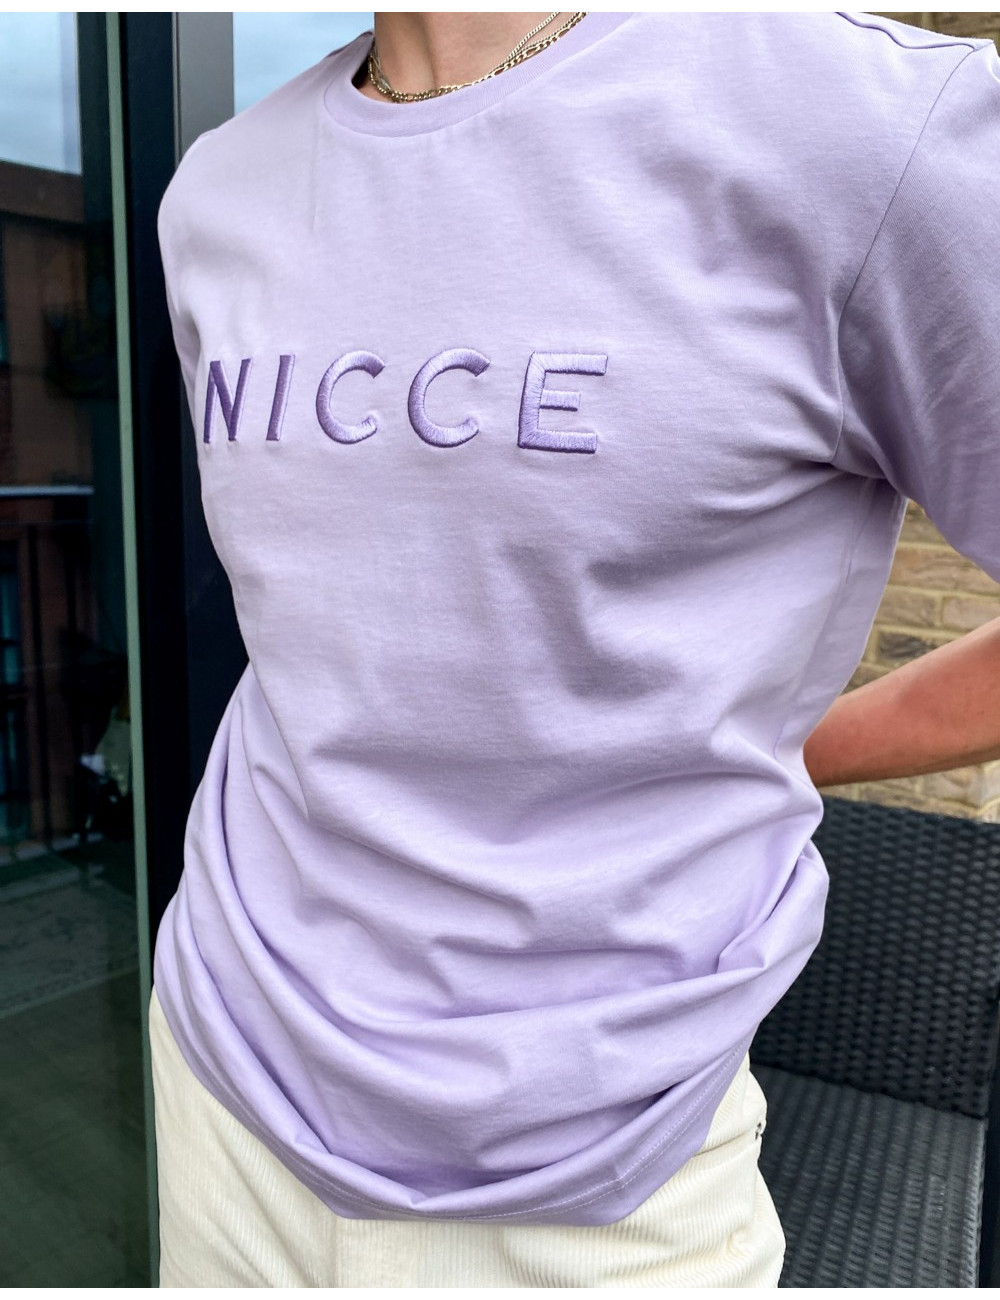 Nicce mercury embroidered...